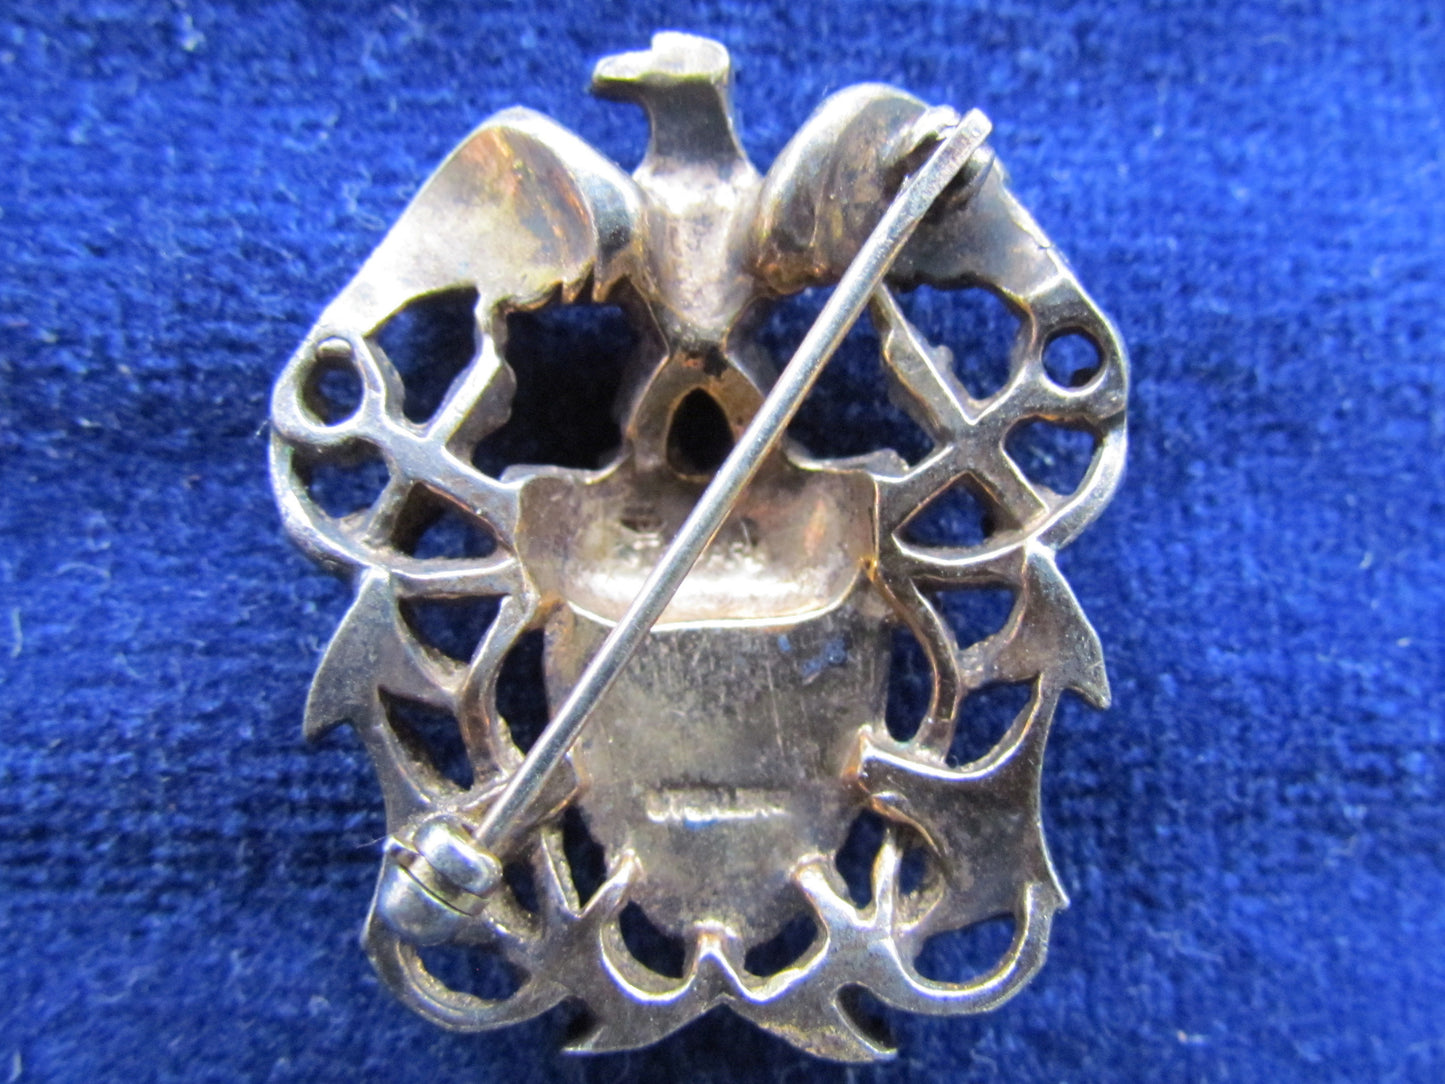 Silver American Sweethearts Brooch Depicting Stars And Stripes The Eagle And Set With Non Preious Stones